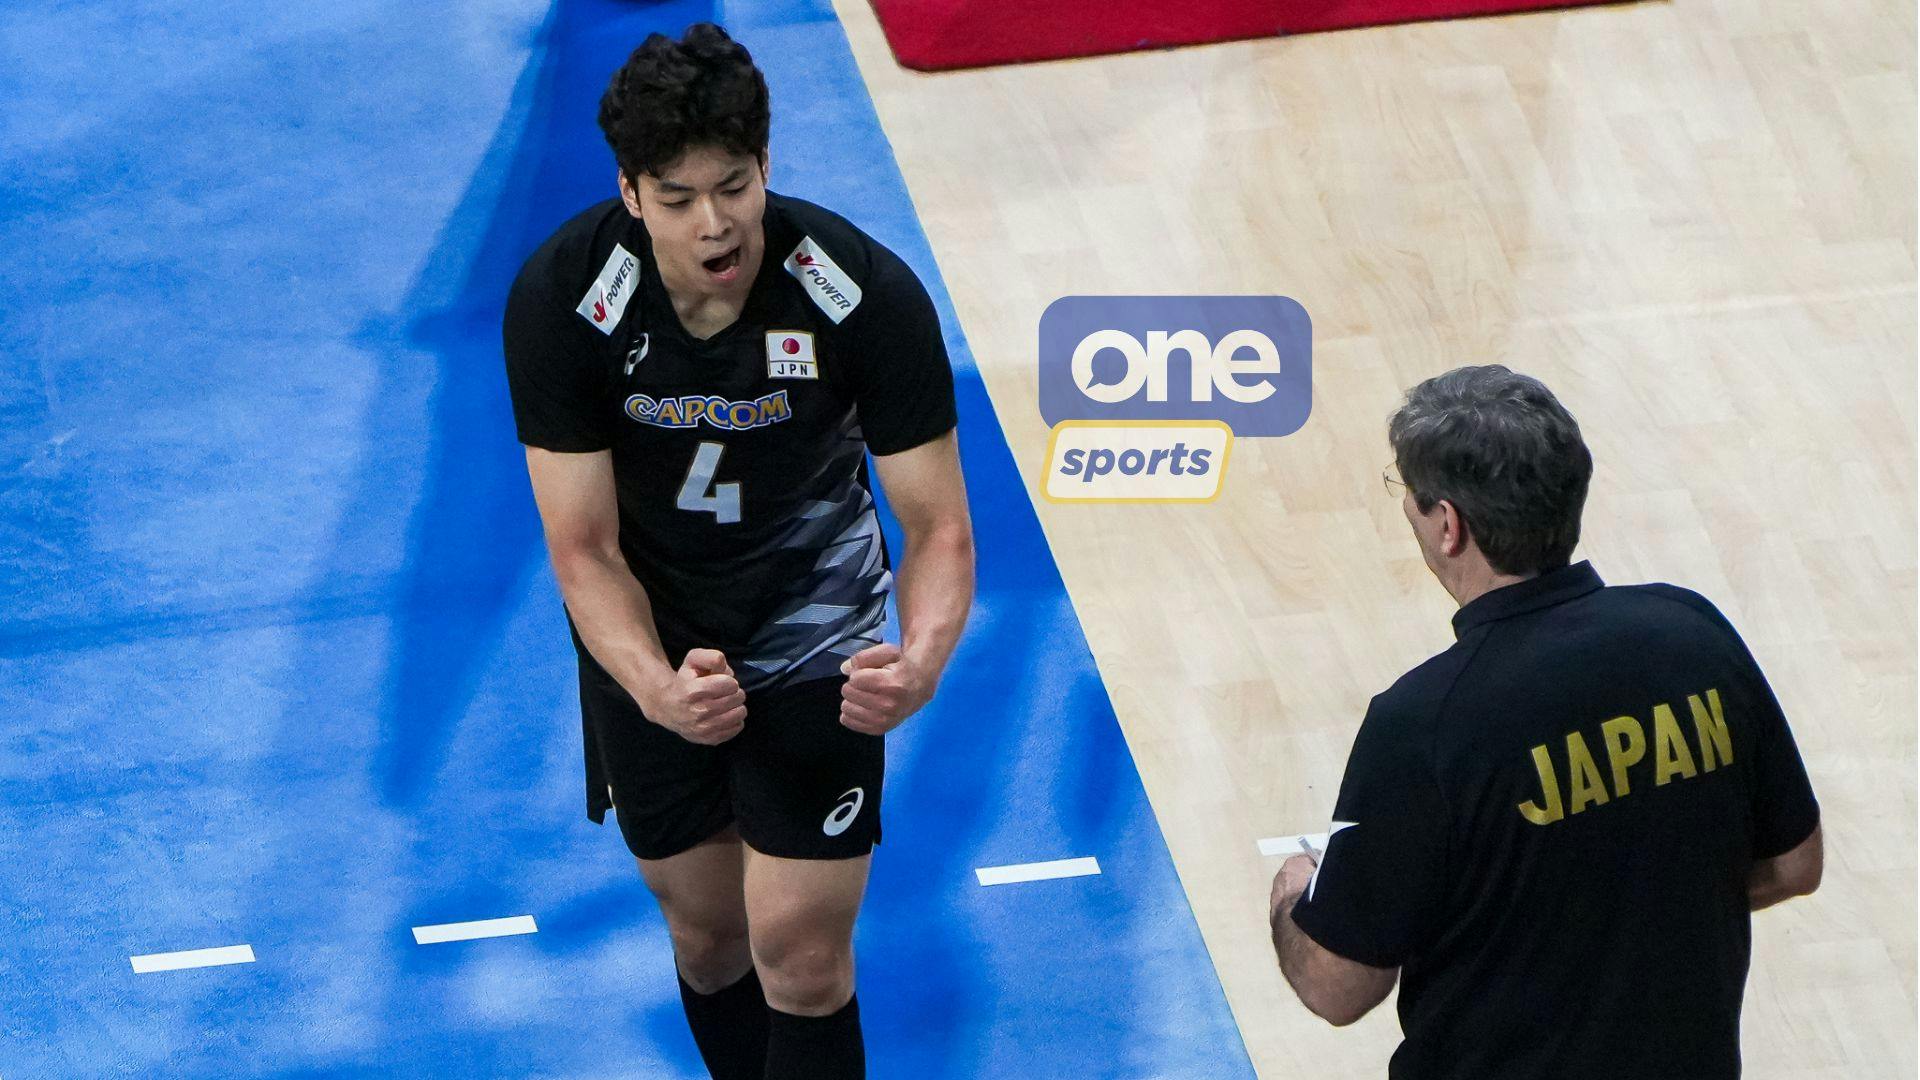 VNL: Kento Miyaura, Japan make history after beating Team USA for the first time after 19 FIVB head-to-head games